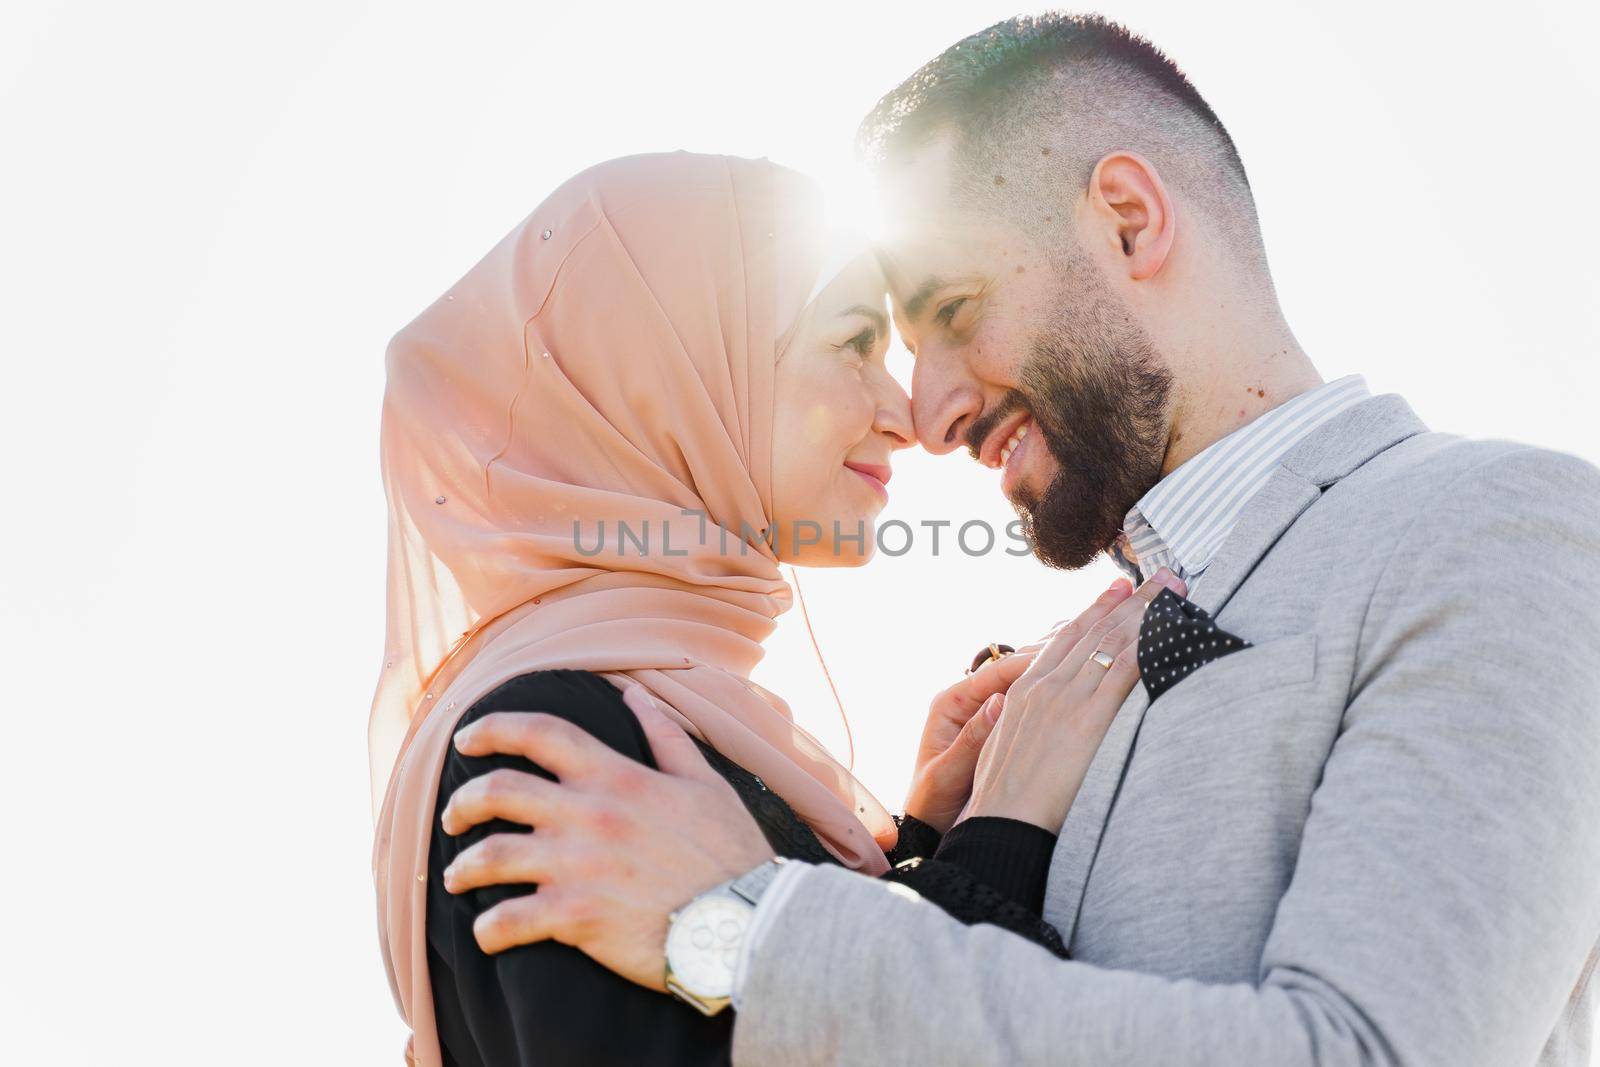 Muslim love story close-up with sun light. Mixed couple smiles and hugs at sunset. Woman weared in hijab looks to her man. Advert for on-line dating agency